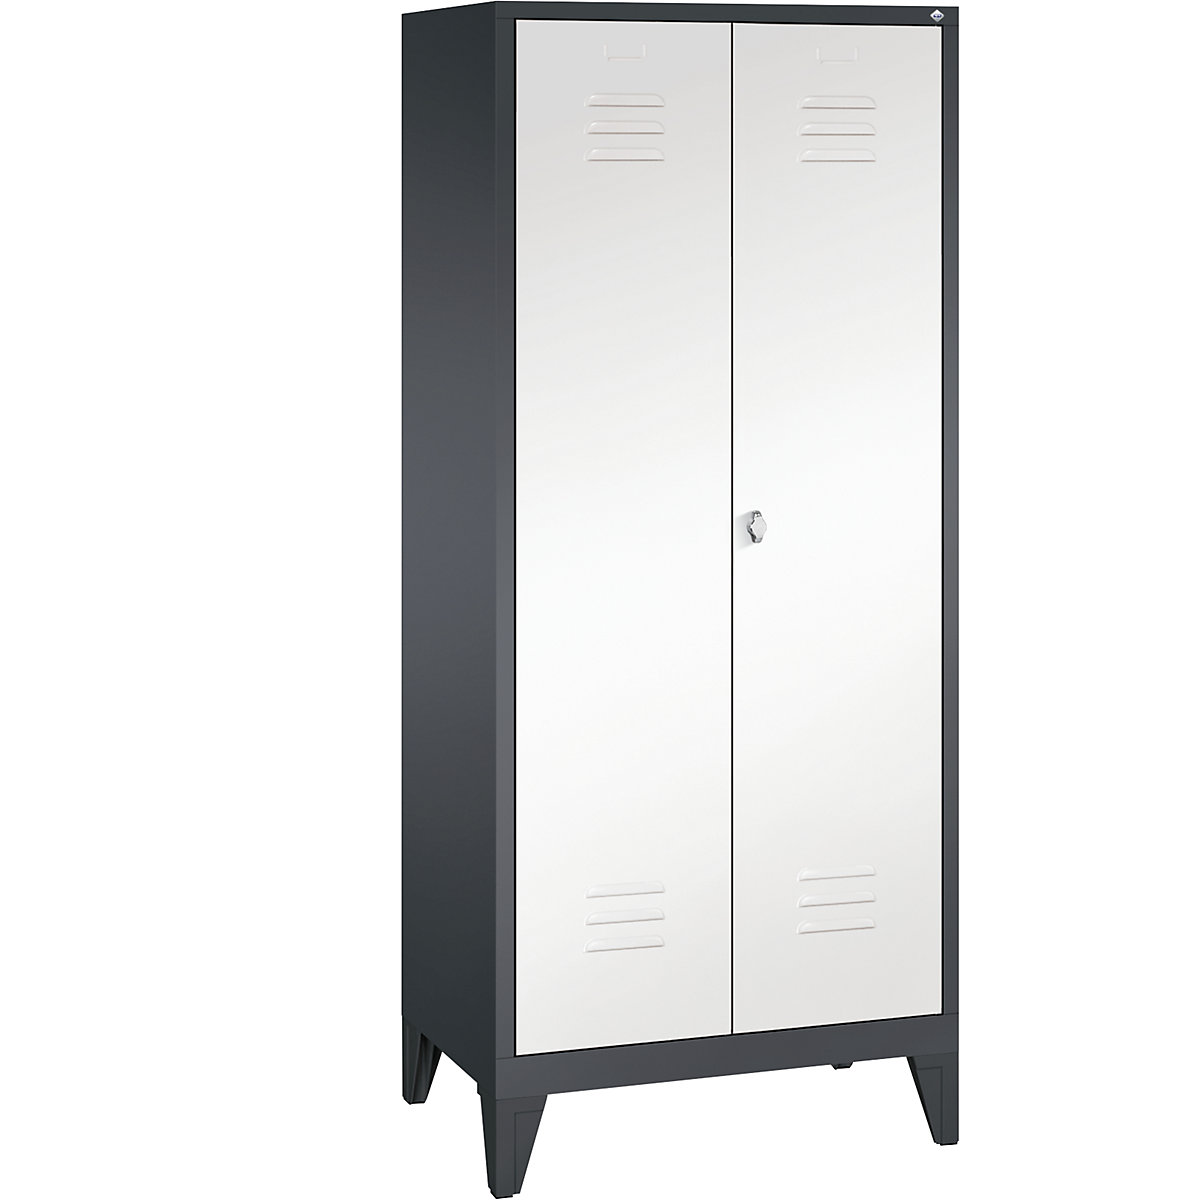 CLASSIC storage cupboard with feet, doors close in the middle – C+P, 2 compartments, compartment width 400 mm, black grey / traffic white-8